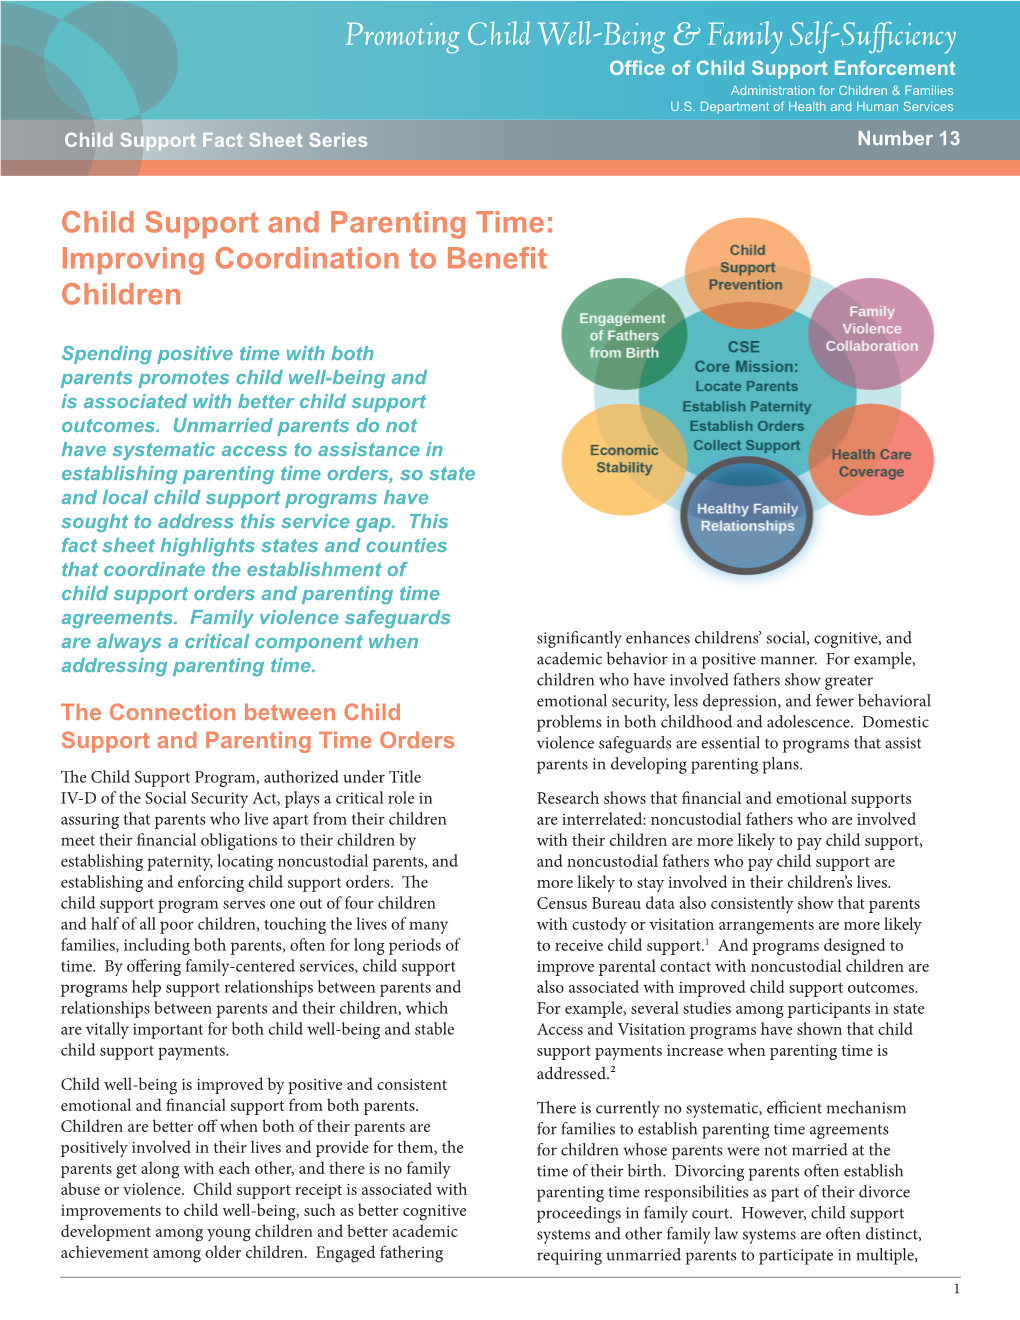 Child Support and Parenting Time:Improving Coordination to Benefit Children